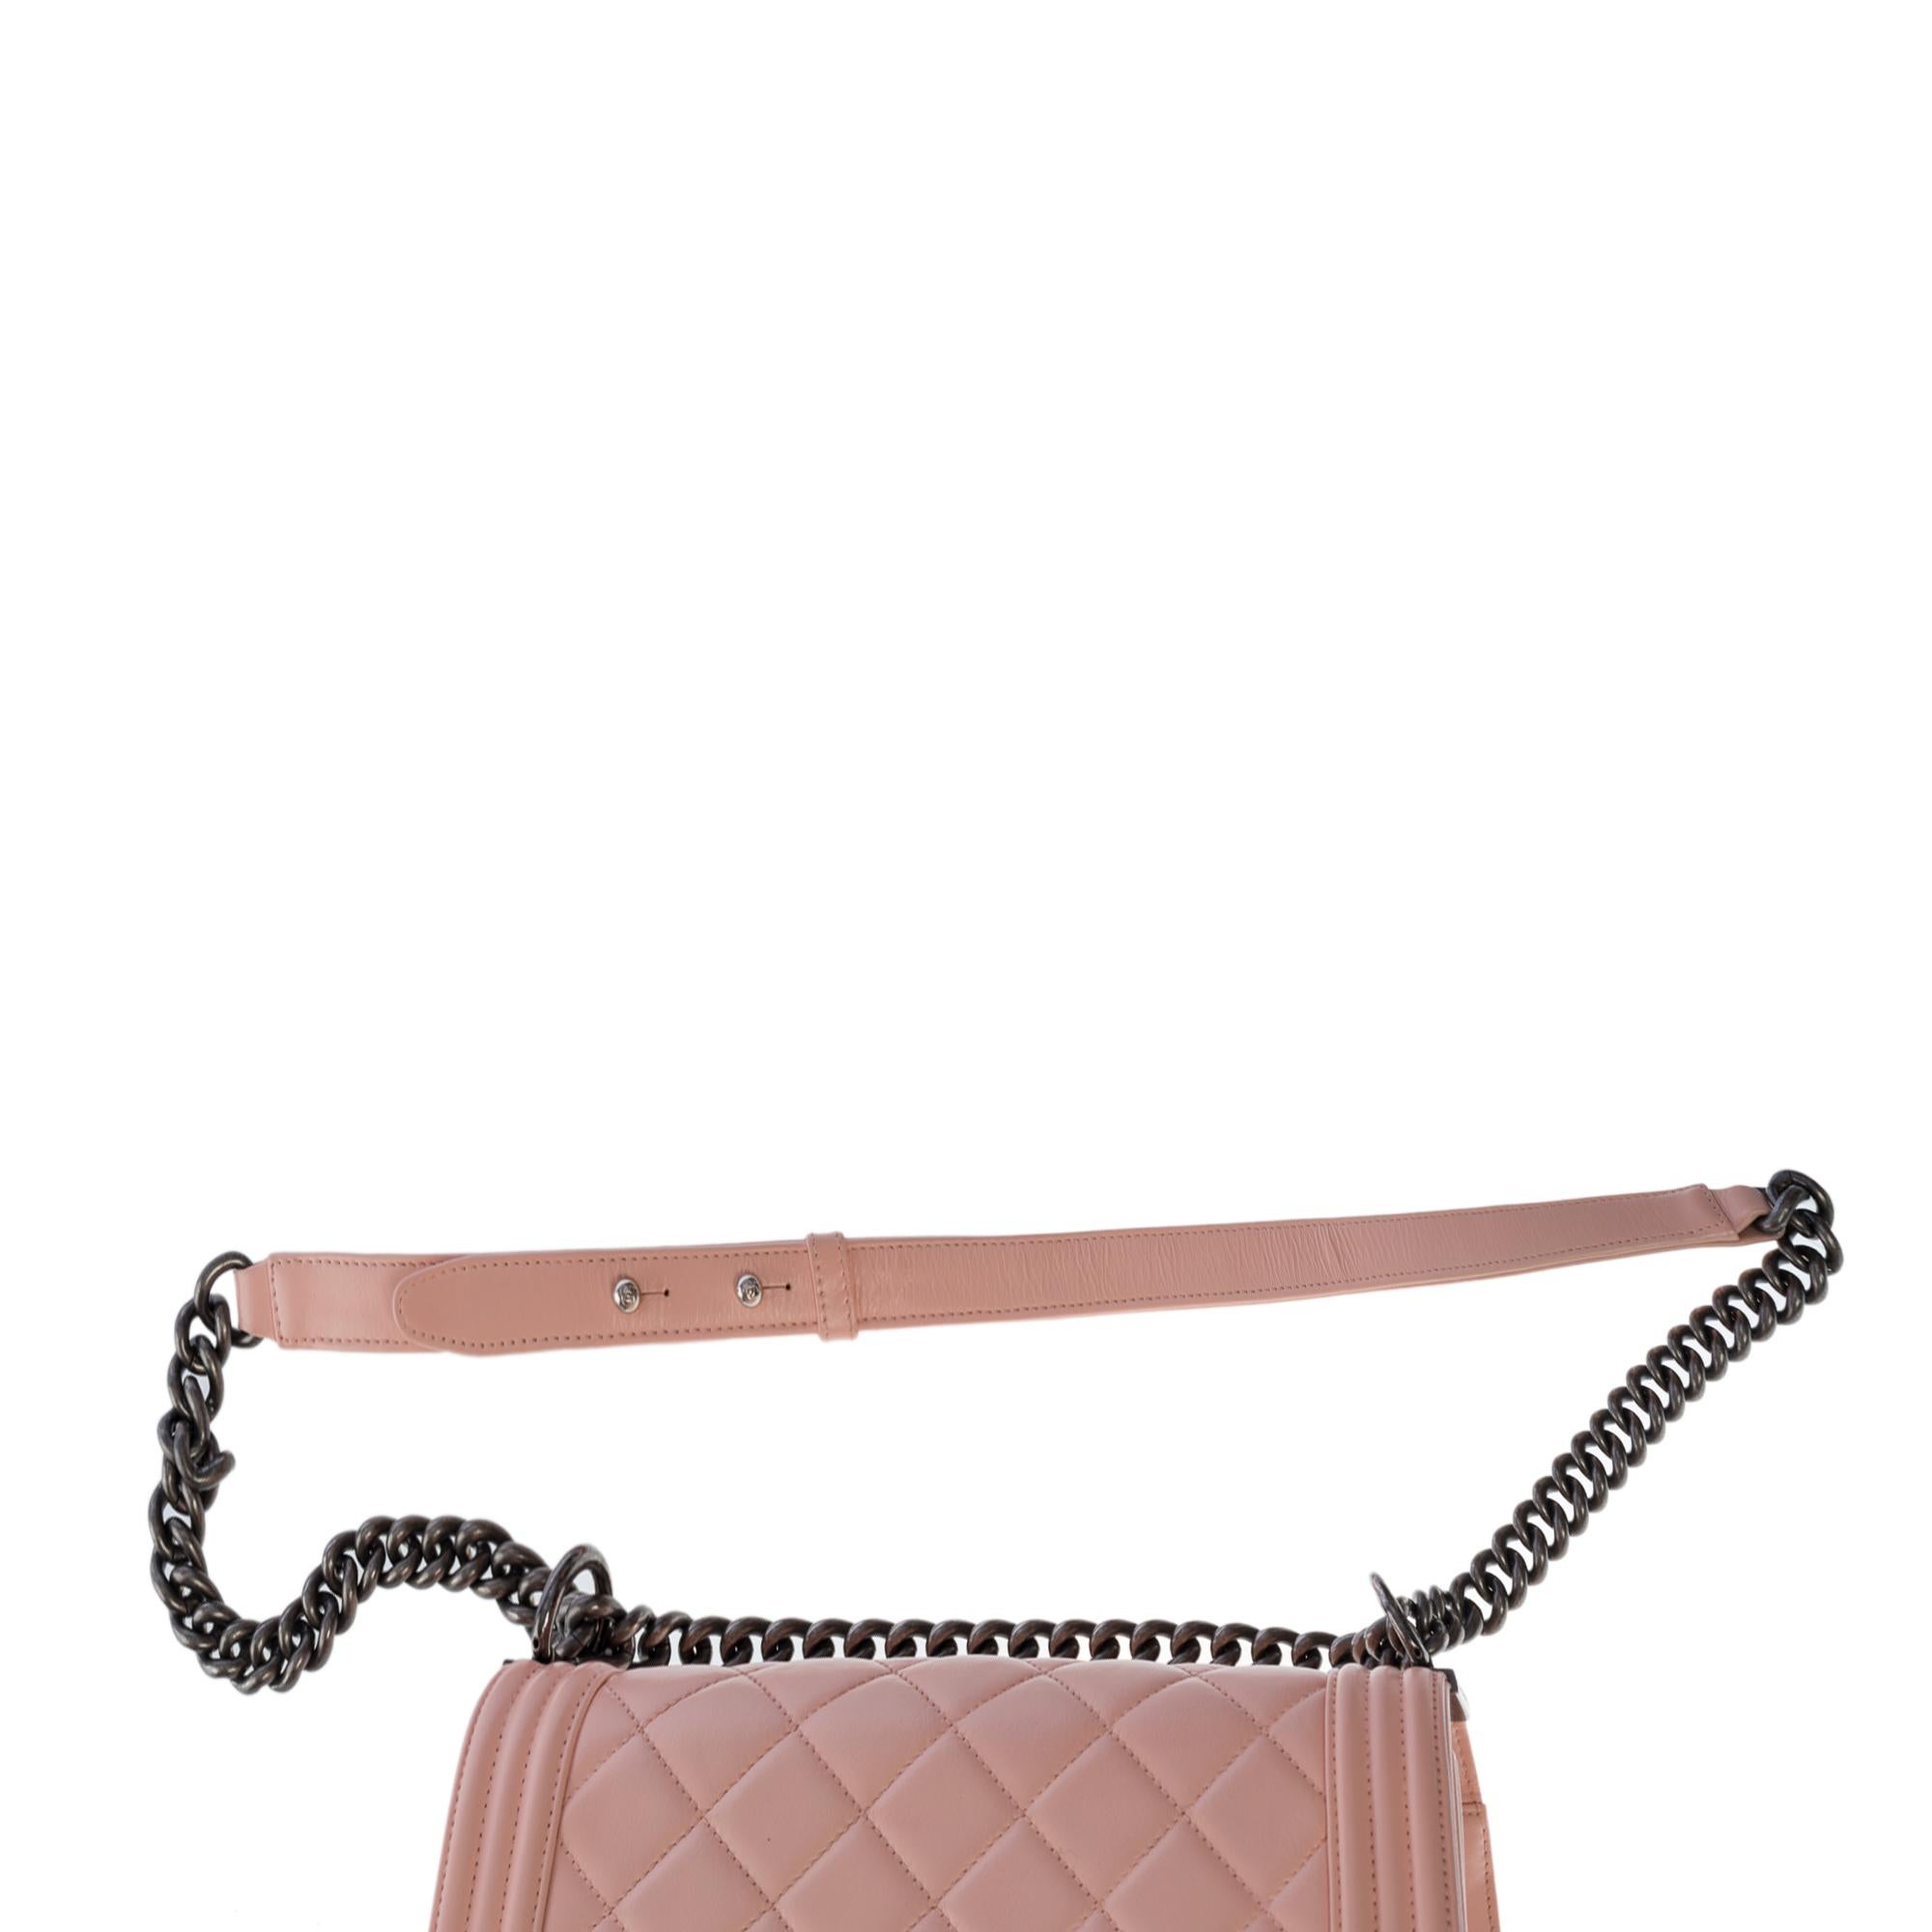 Amazing Chanel Boy Old medium shoulder bag in Pink quilted leather, SHW For Sale 4